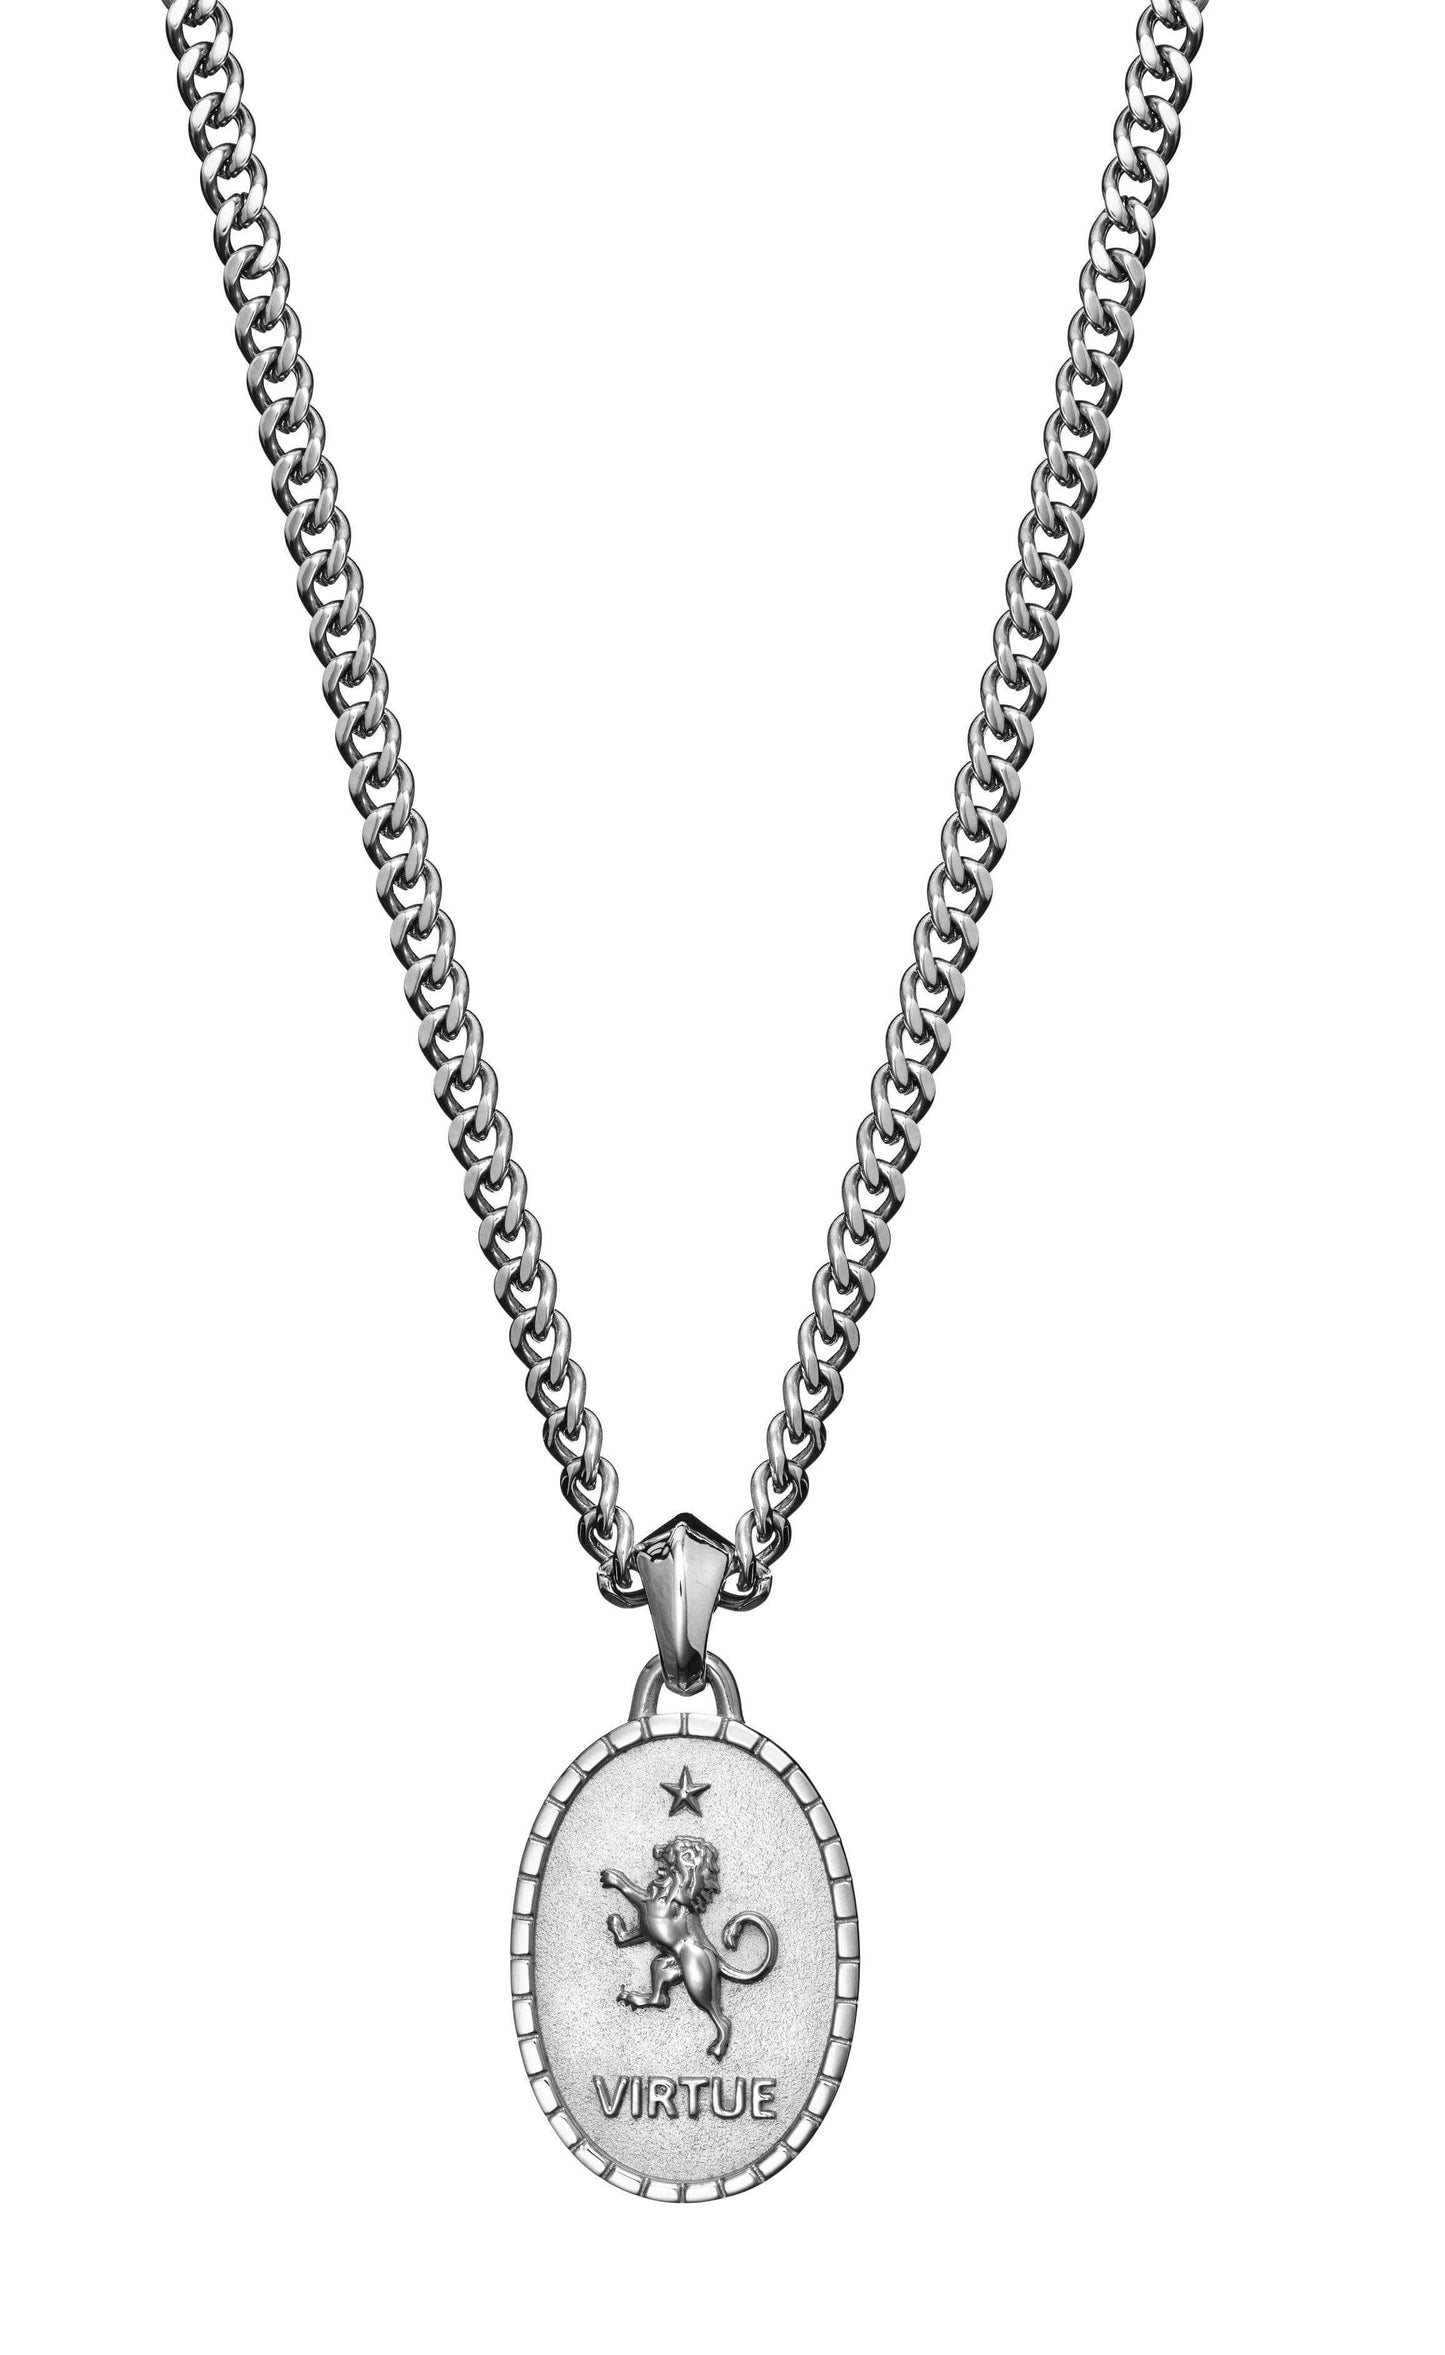 VIRTUE NECKLACE - SILVER